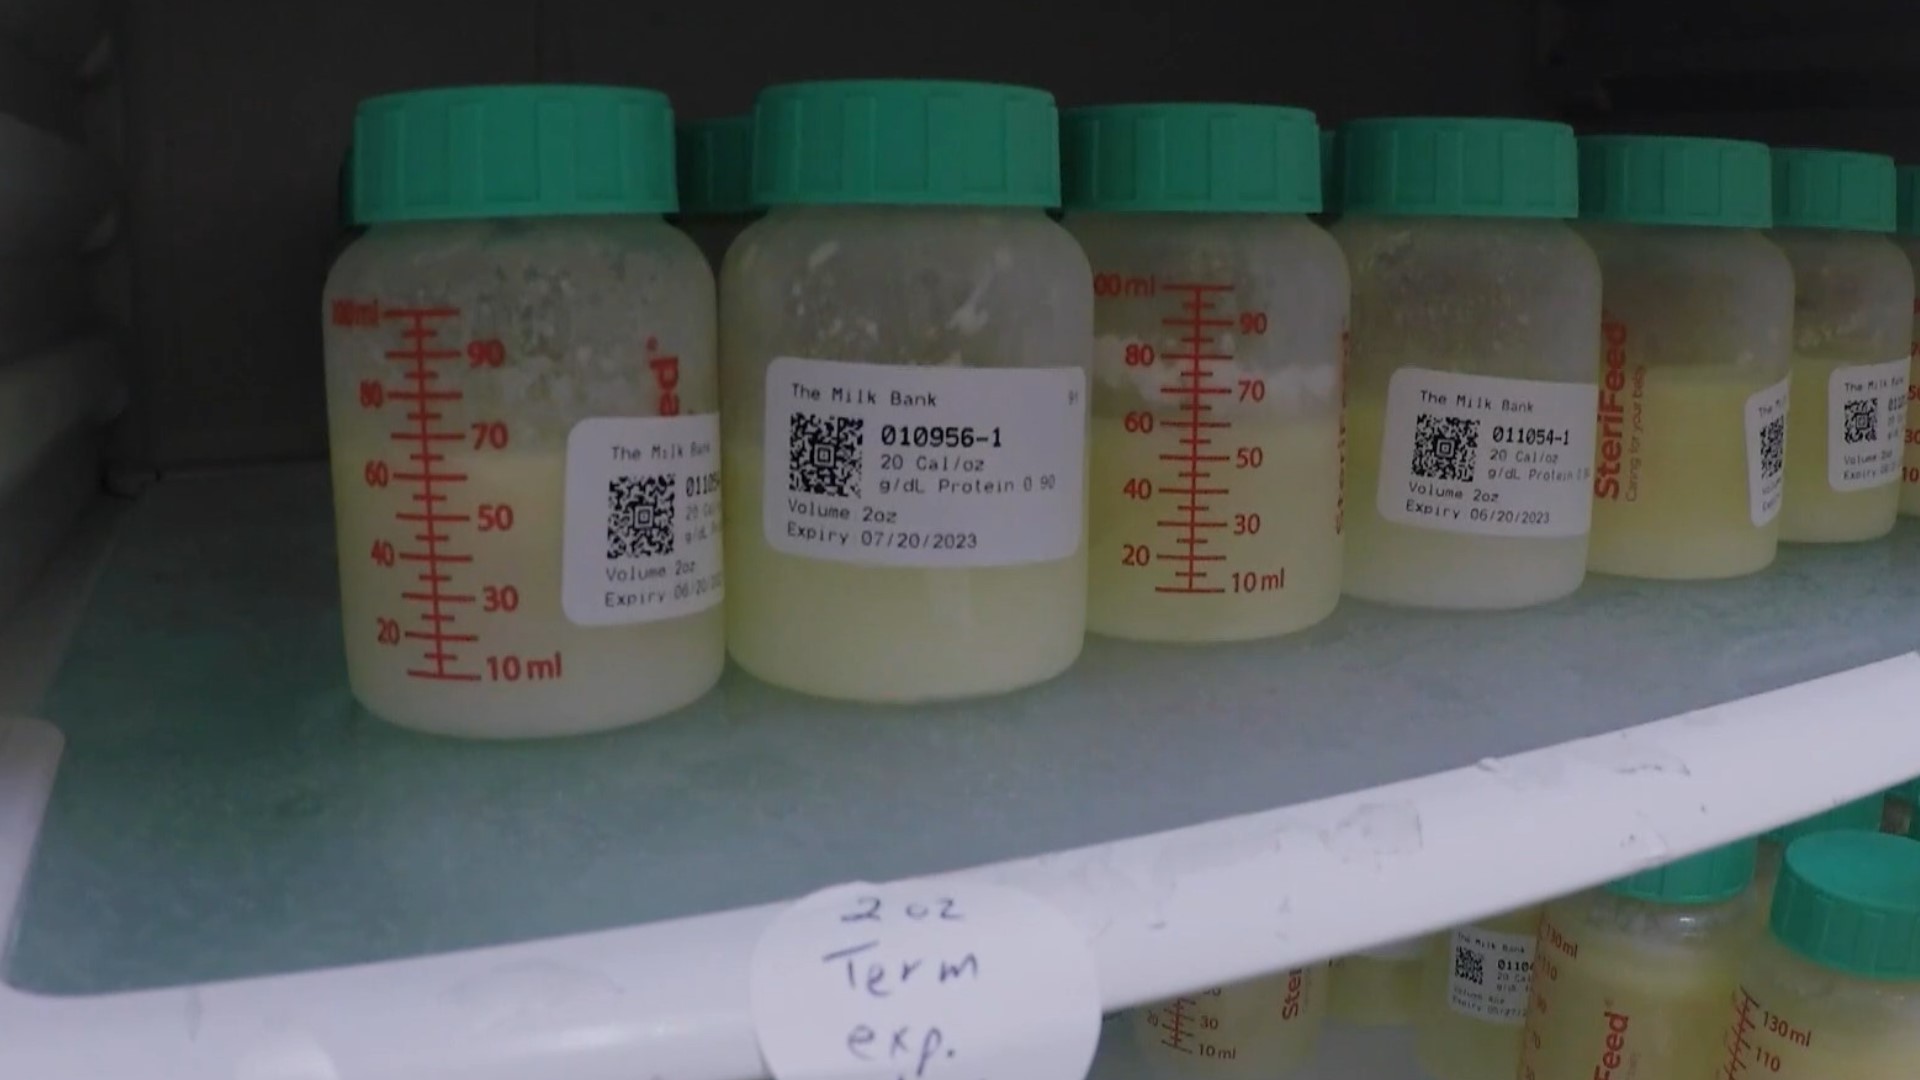 Access to donated breast milk that can reduce deadly diseases in preemies varies across states. ultiple studies show babies given formula made with cow's milk are mo